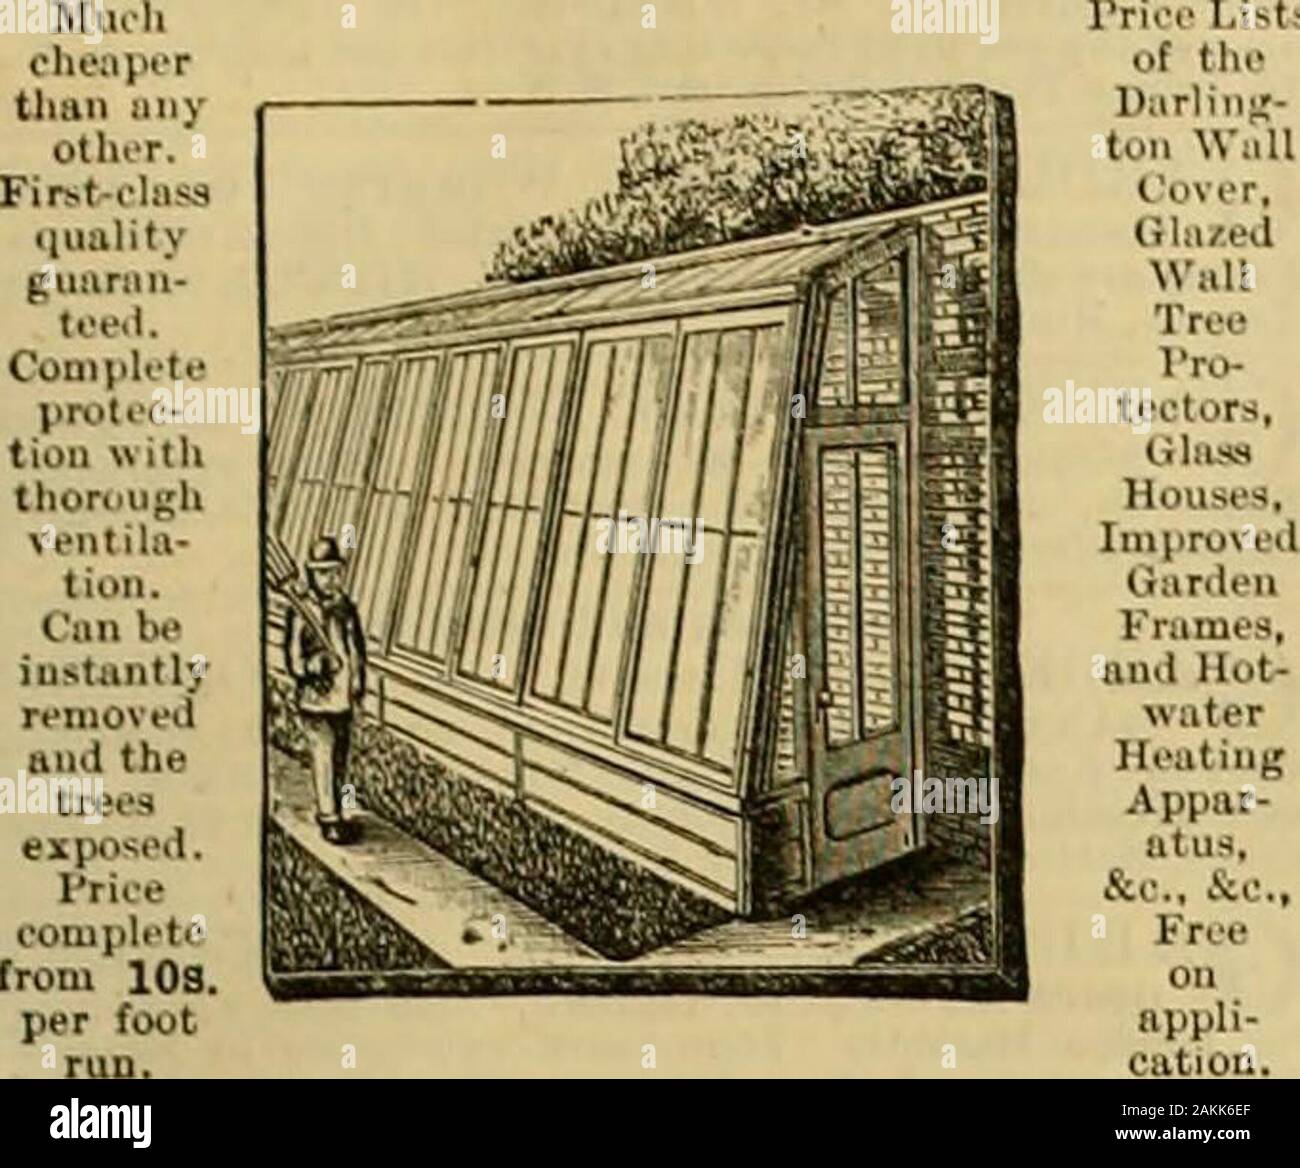 The Gardeners' chronicle : a weekly illustrated journal of horticulture and allied subjects . JAS. BOYD & SONS, Horticultural Buildkrsand Heating Engineers, PAISLEY. HORTICULTURAL STRUCTURES of every description, in either Wood or Iron, or both combined. Wooden Chapelii, Shoi^iting Lodges, TfmiiH Courts, CottJJges, Sec. Hot - water Apparatui for w&rming Building of every description. Illustrated Circutart Post-free. Oomplet* OatalOffU*, Sa. JiAiicu IG, 1889.] THE GABDENERS CHRONICLE. S49 DARLINGTON Miulitlittii iiiiy OtIUT. .nullity pimnui- tee.l.CouipKtf |iroti.--tion witlitliortiu^li ventila Stock Photo